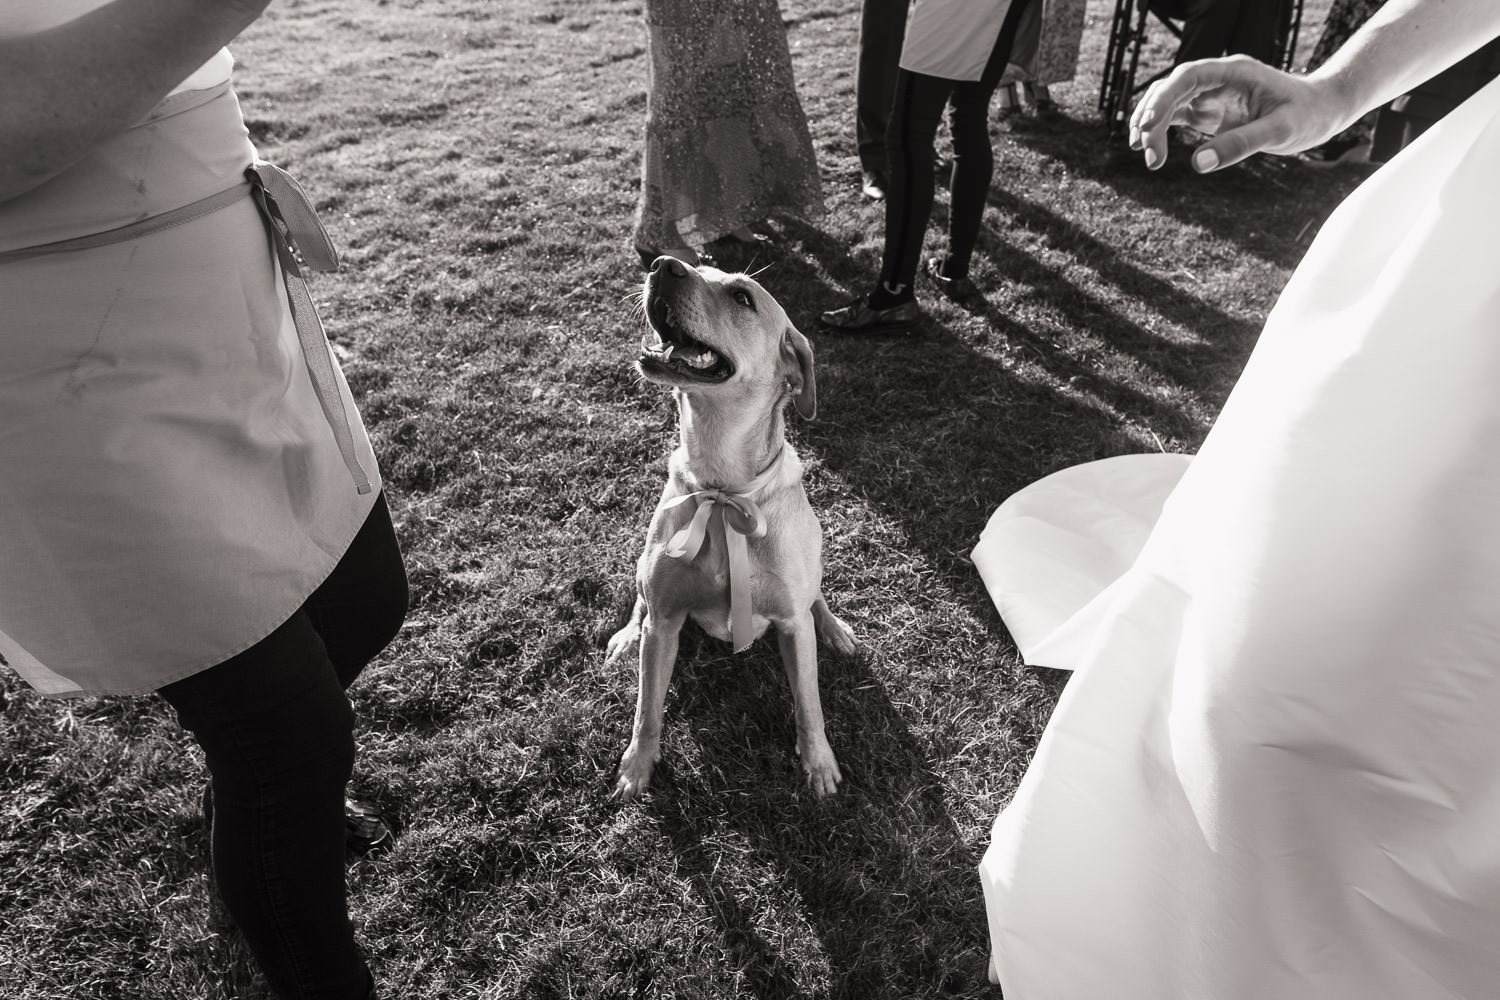 A dog looks up at a woman in an apron next to a bride in a white dress.